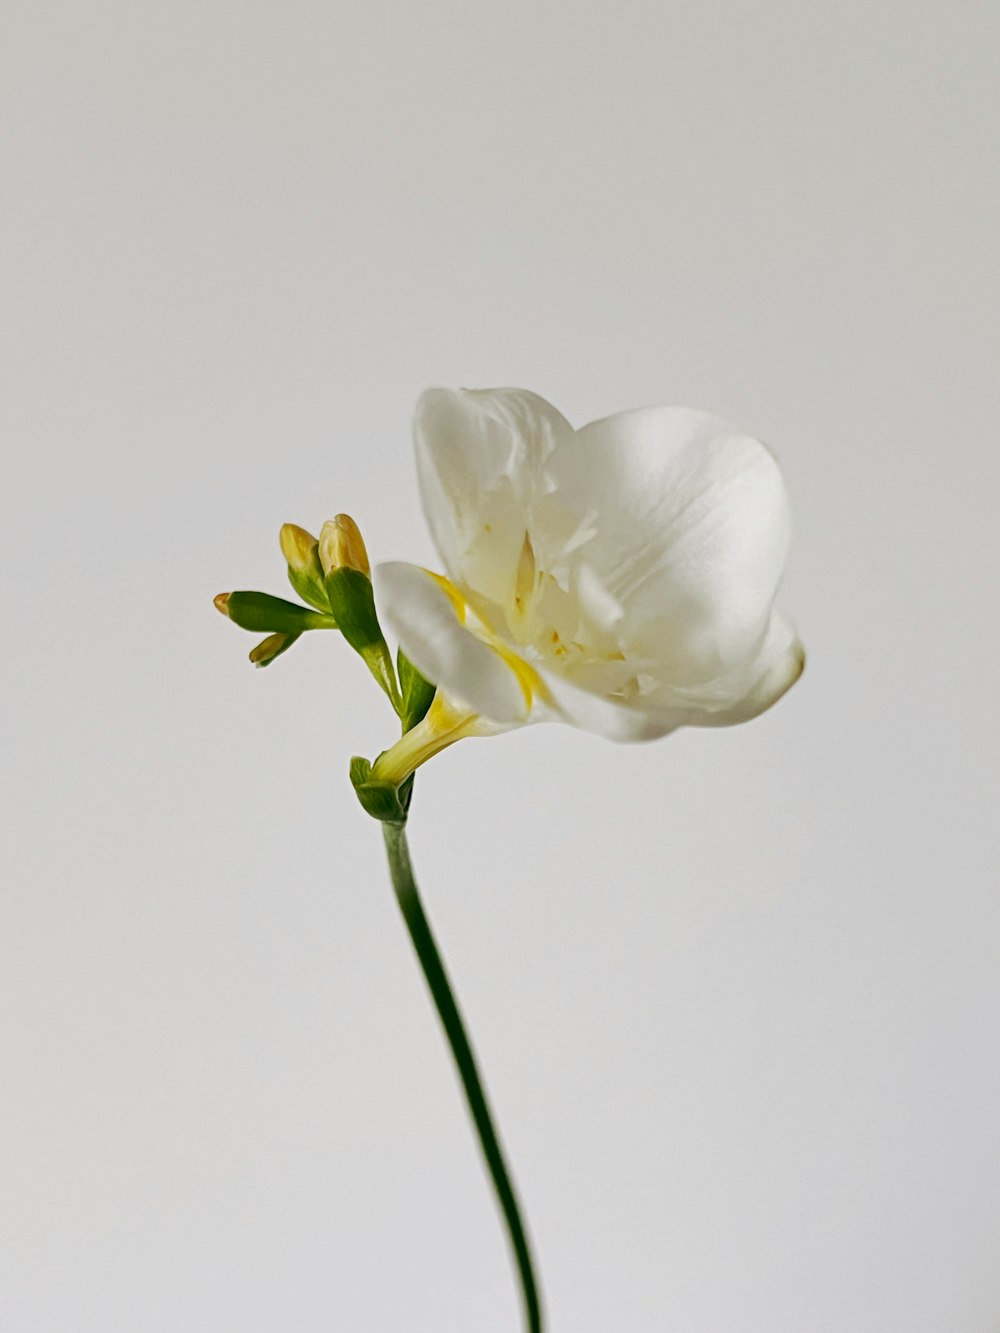 a single white flower in a glass vase